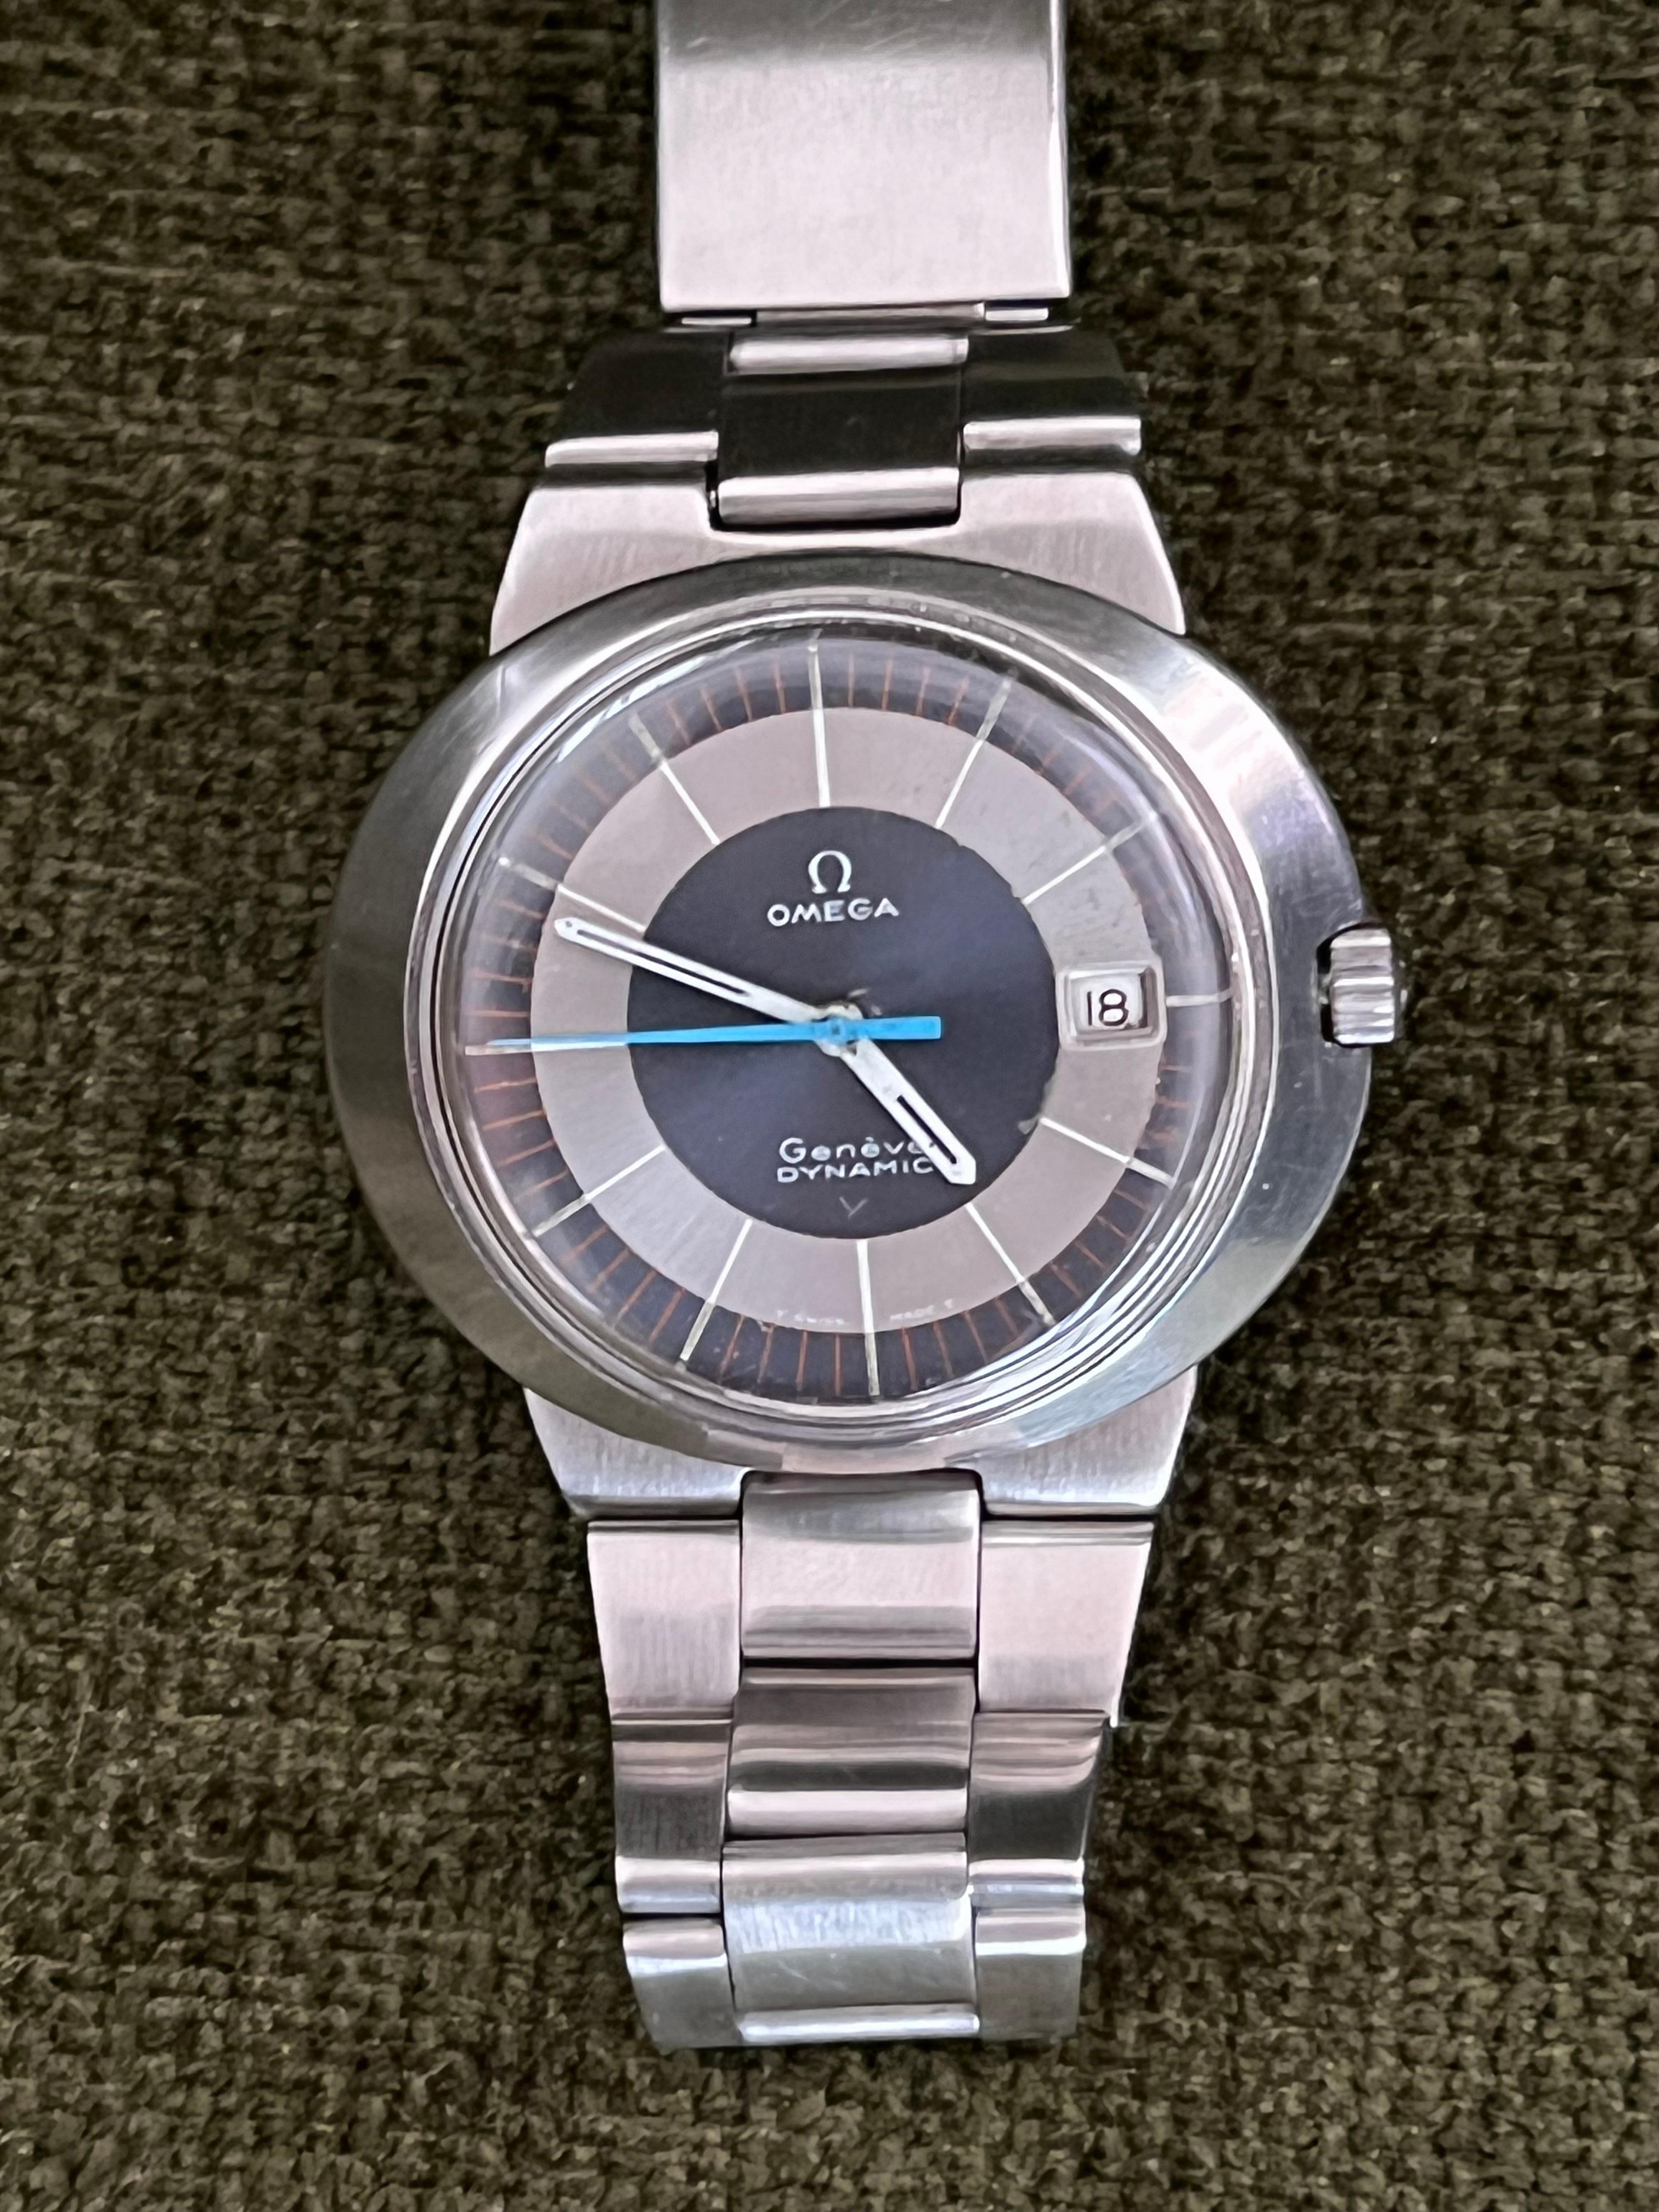 Not many watches on the market can match the simple but unique look of the incredibly coveted Omega Dynamic. This timepiece features a beautiful oval stainless steel case that measures approximately 42mm (case to crown) x 11mm (high). It has a